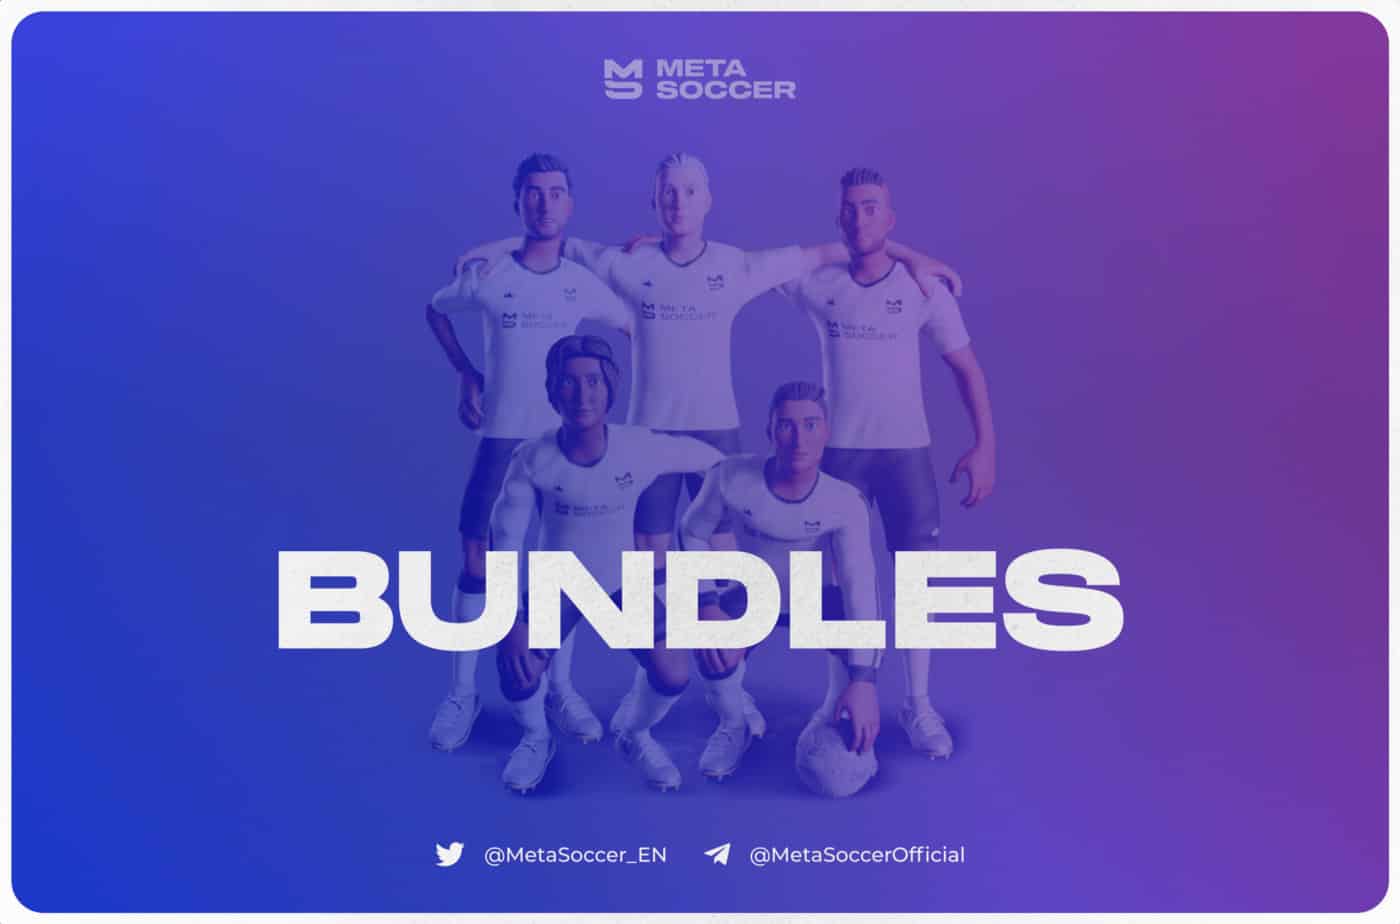 MetaSoccer Marketplace Introduces a New Section - Bundles